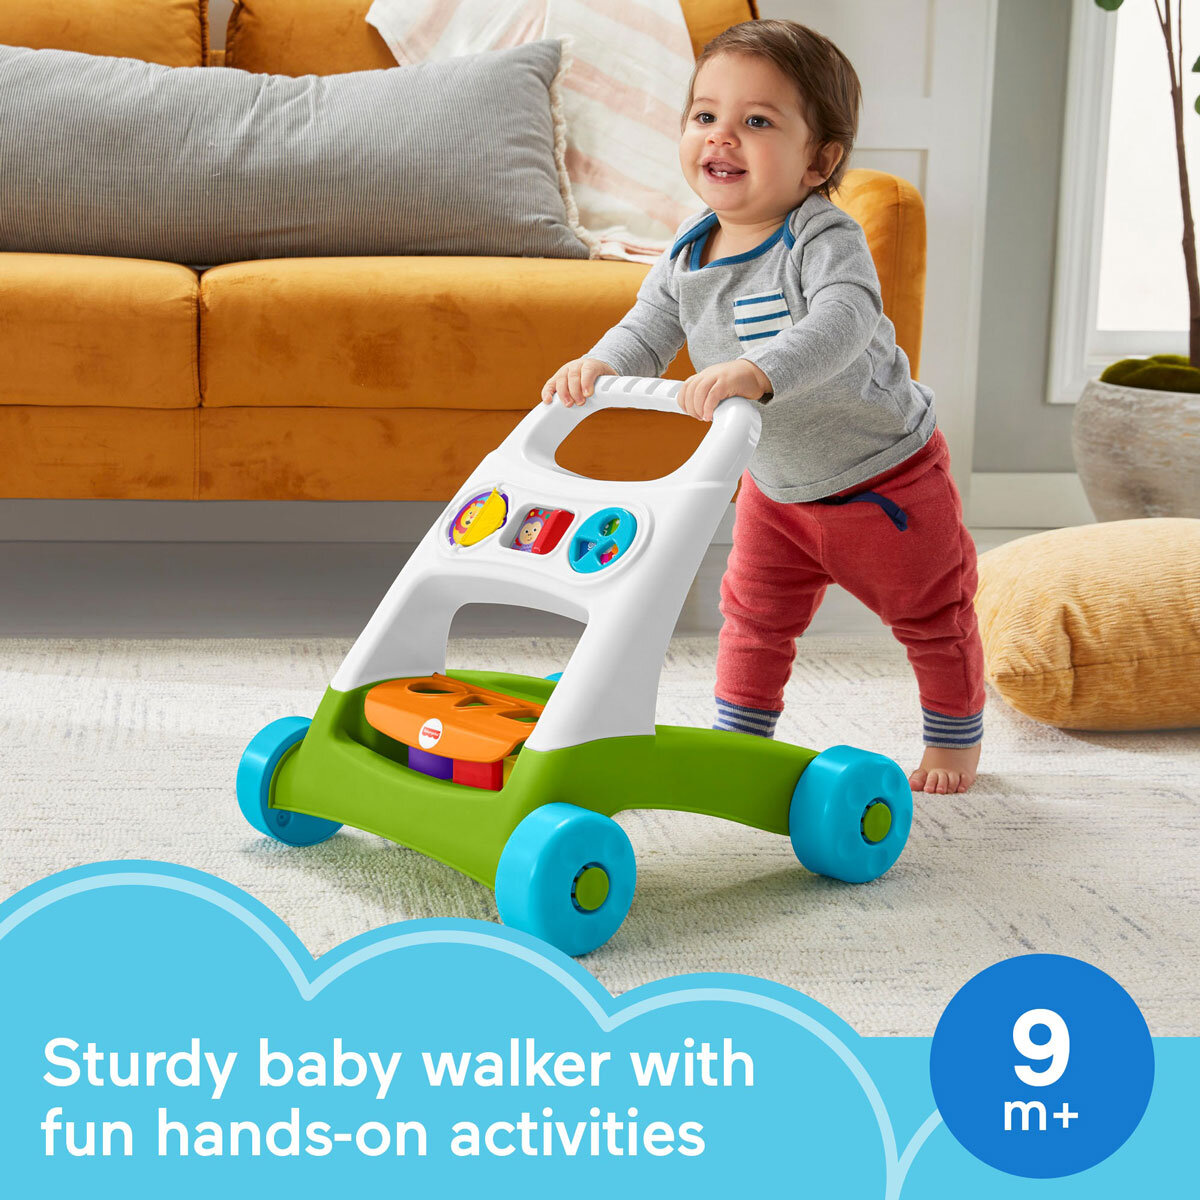 Buy Fisher Price Walk N Play Lifestyle2 Image at Costco.co.uk